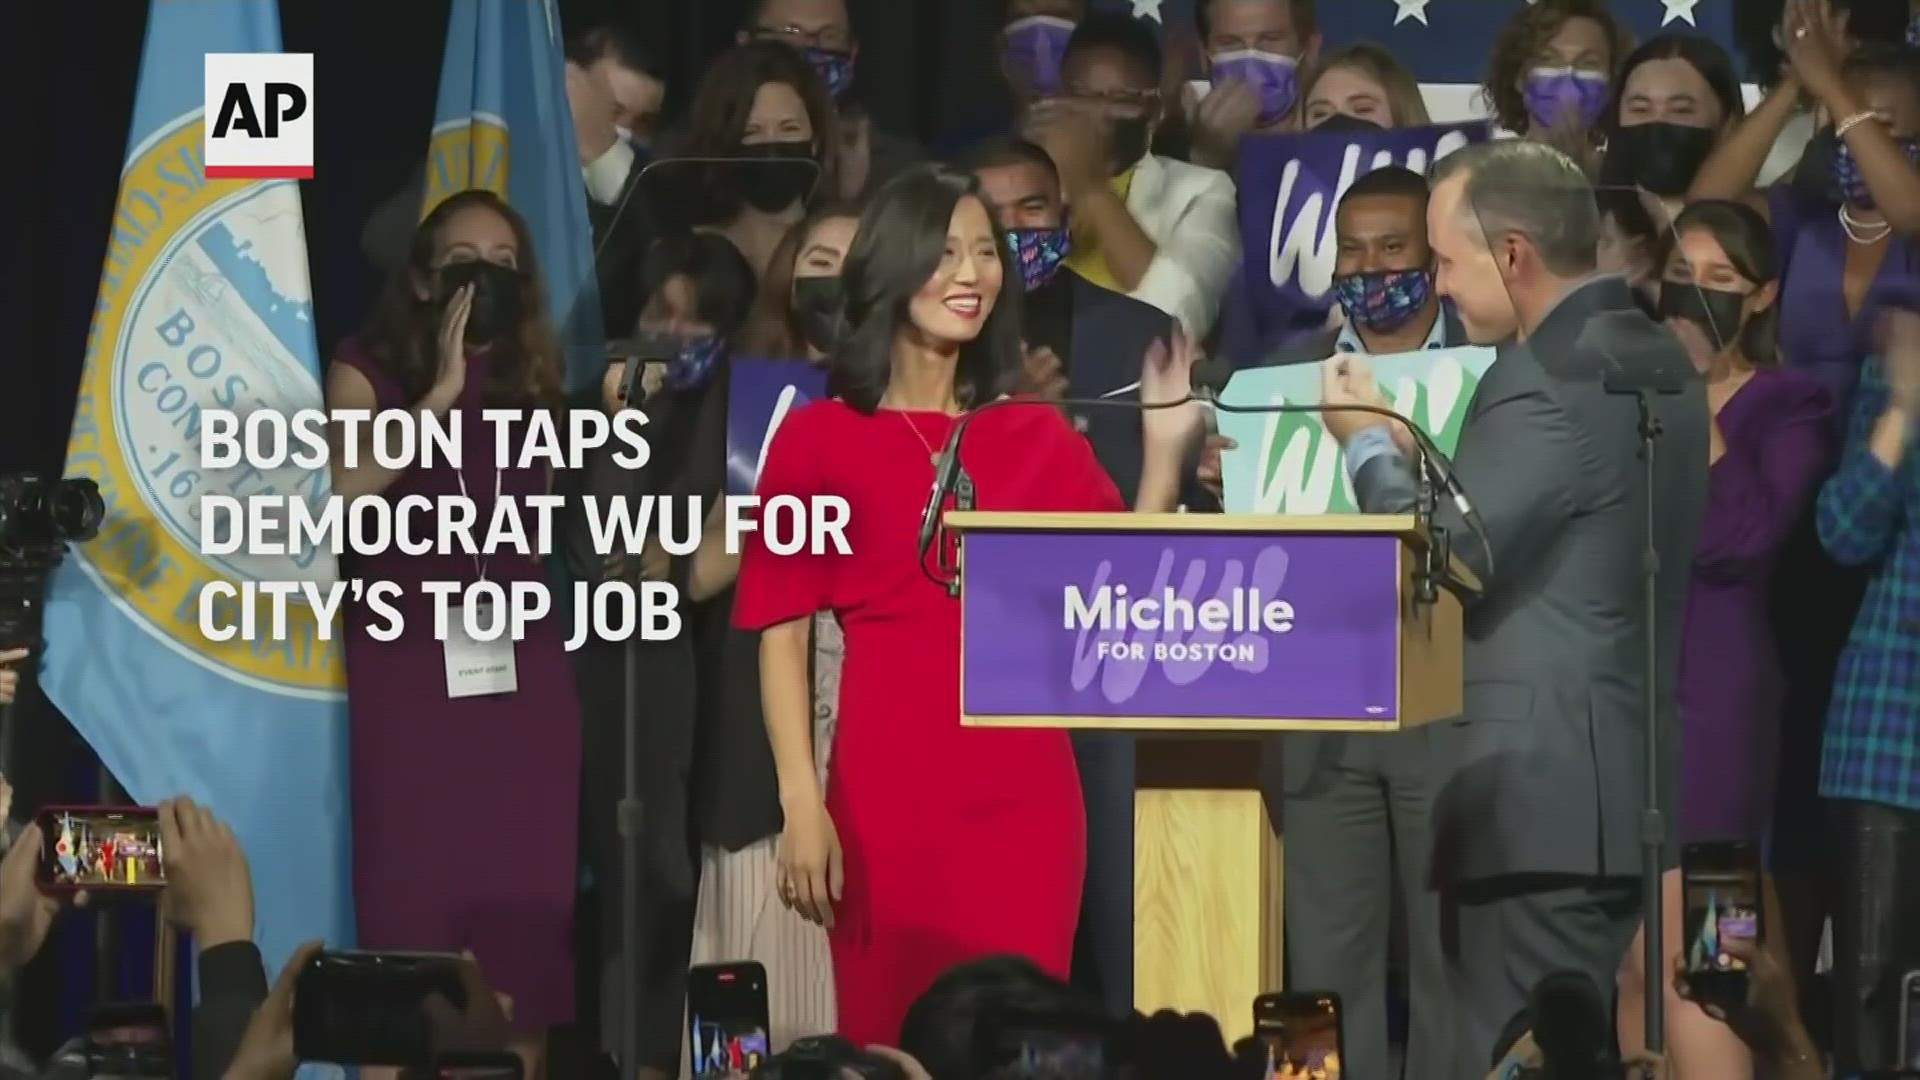 Boston voters for the first time elected a woman and an Asian American as mayor, tapping City Councilor Michelle Wu to serve in the city’s top political office.